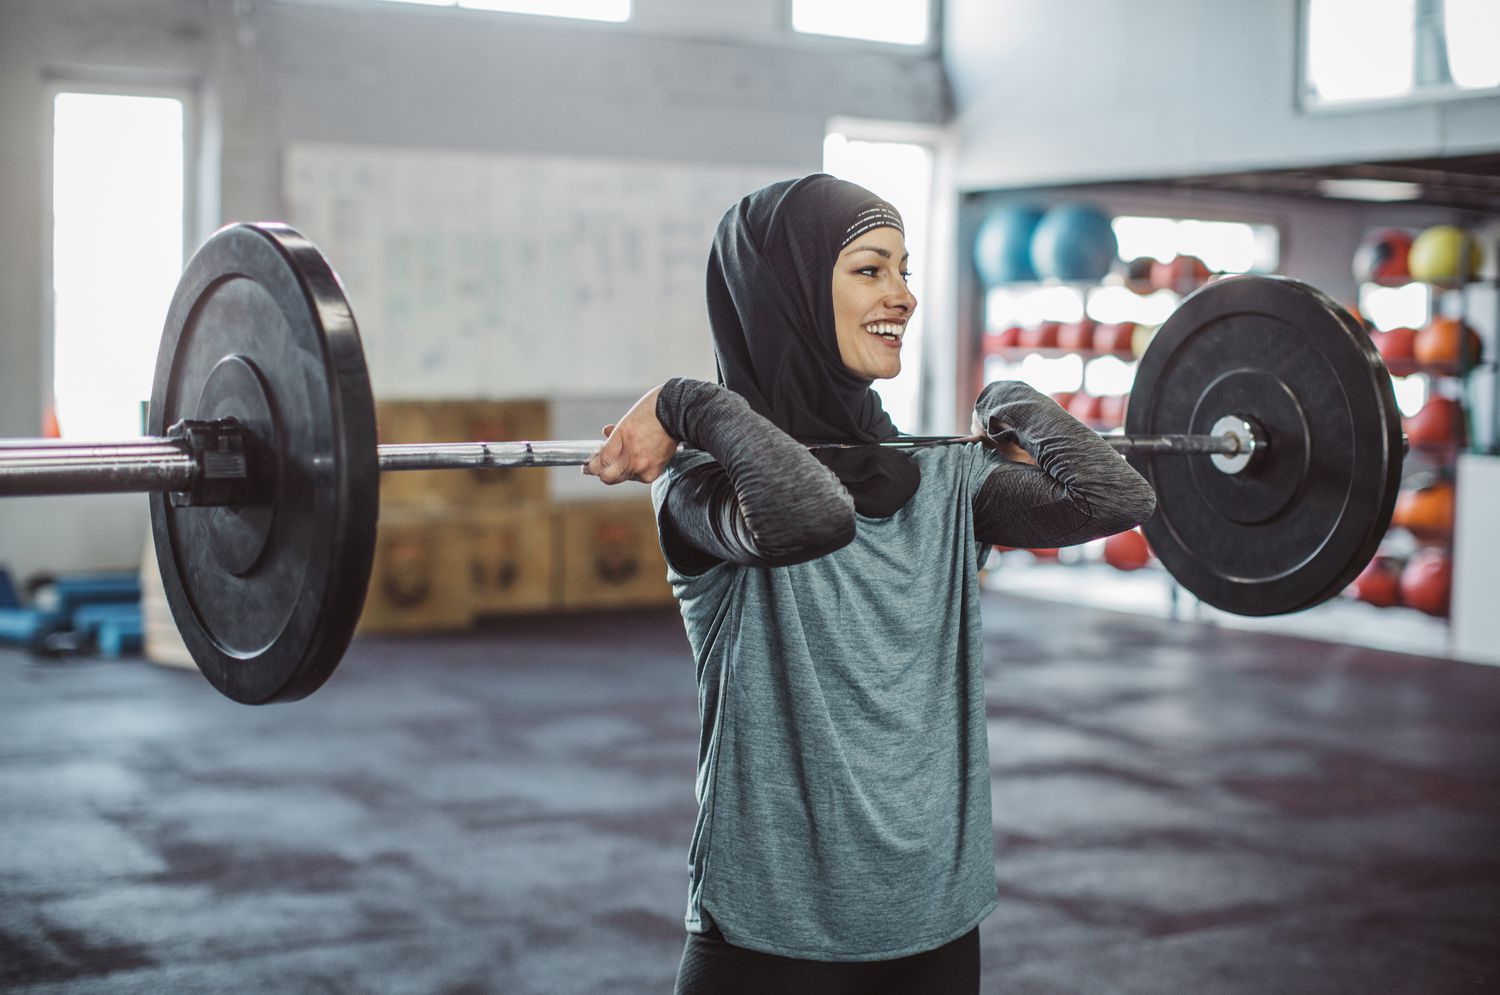 Young woman on cross training weightlifting. Wearing sports clothing and hijab.